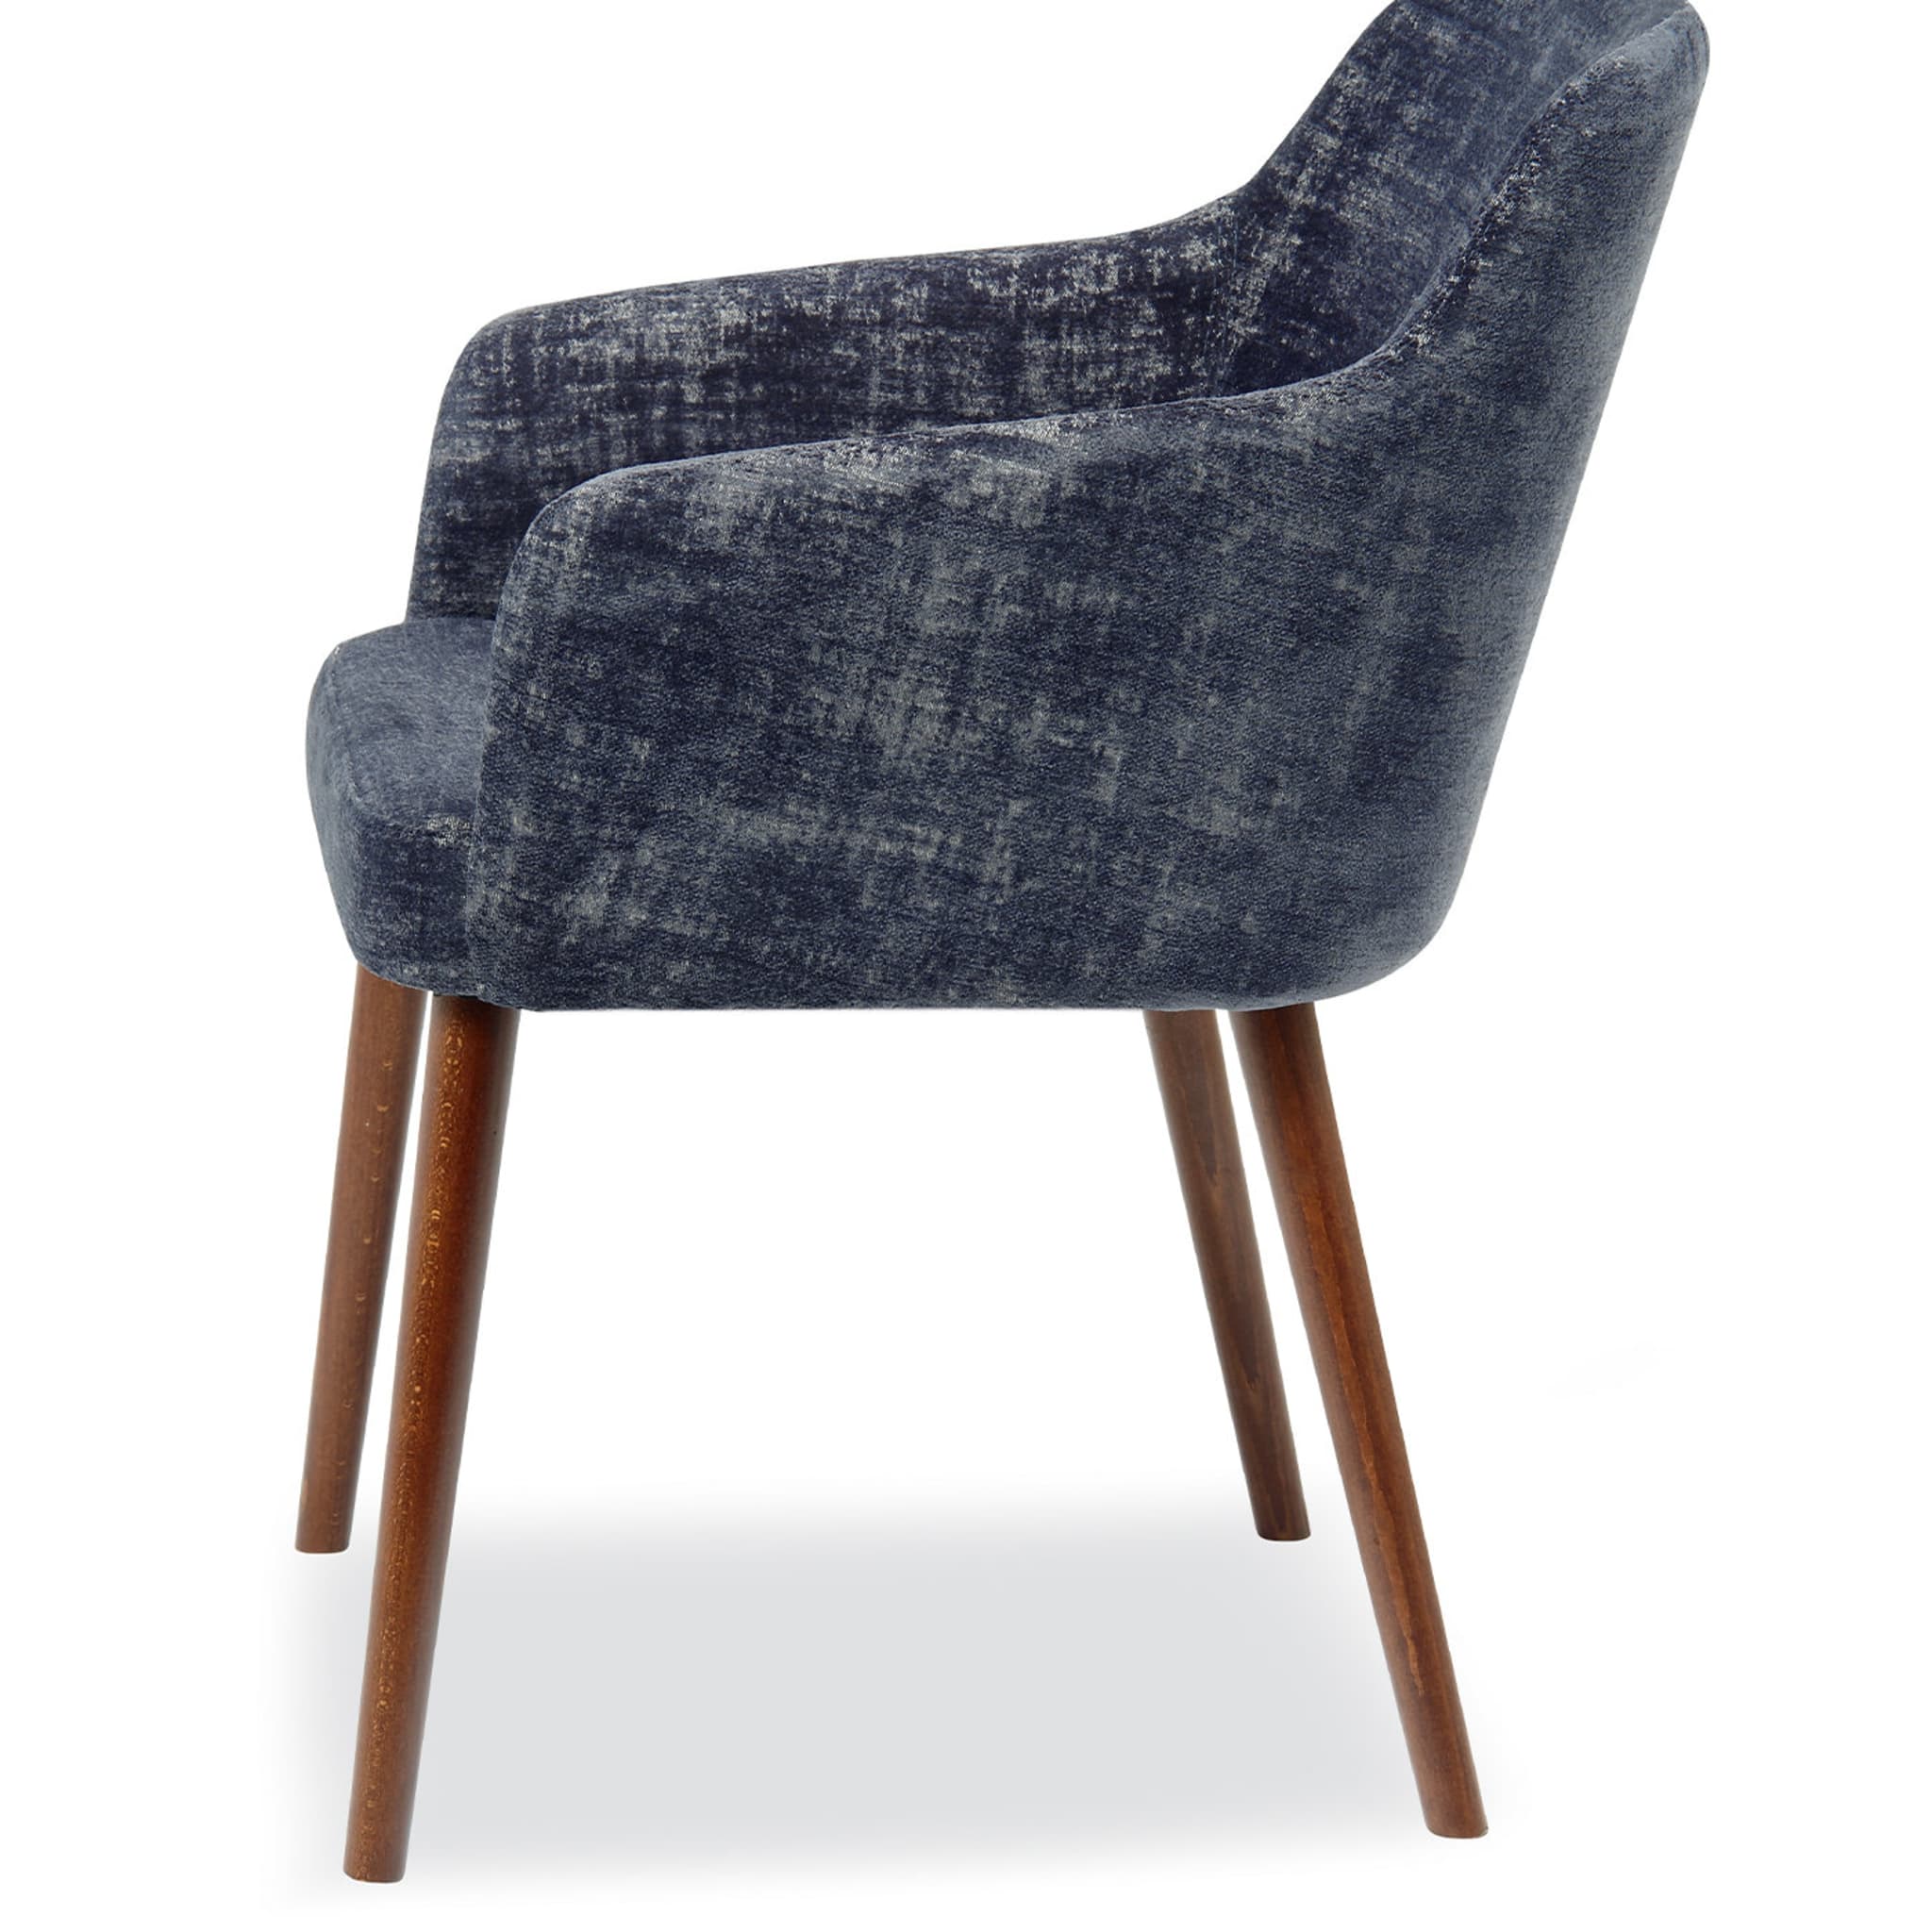 Walter Blue Wood Upholstered Fabric Armchair   - Alternative view 1